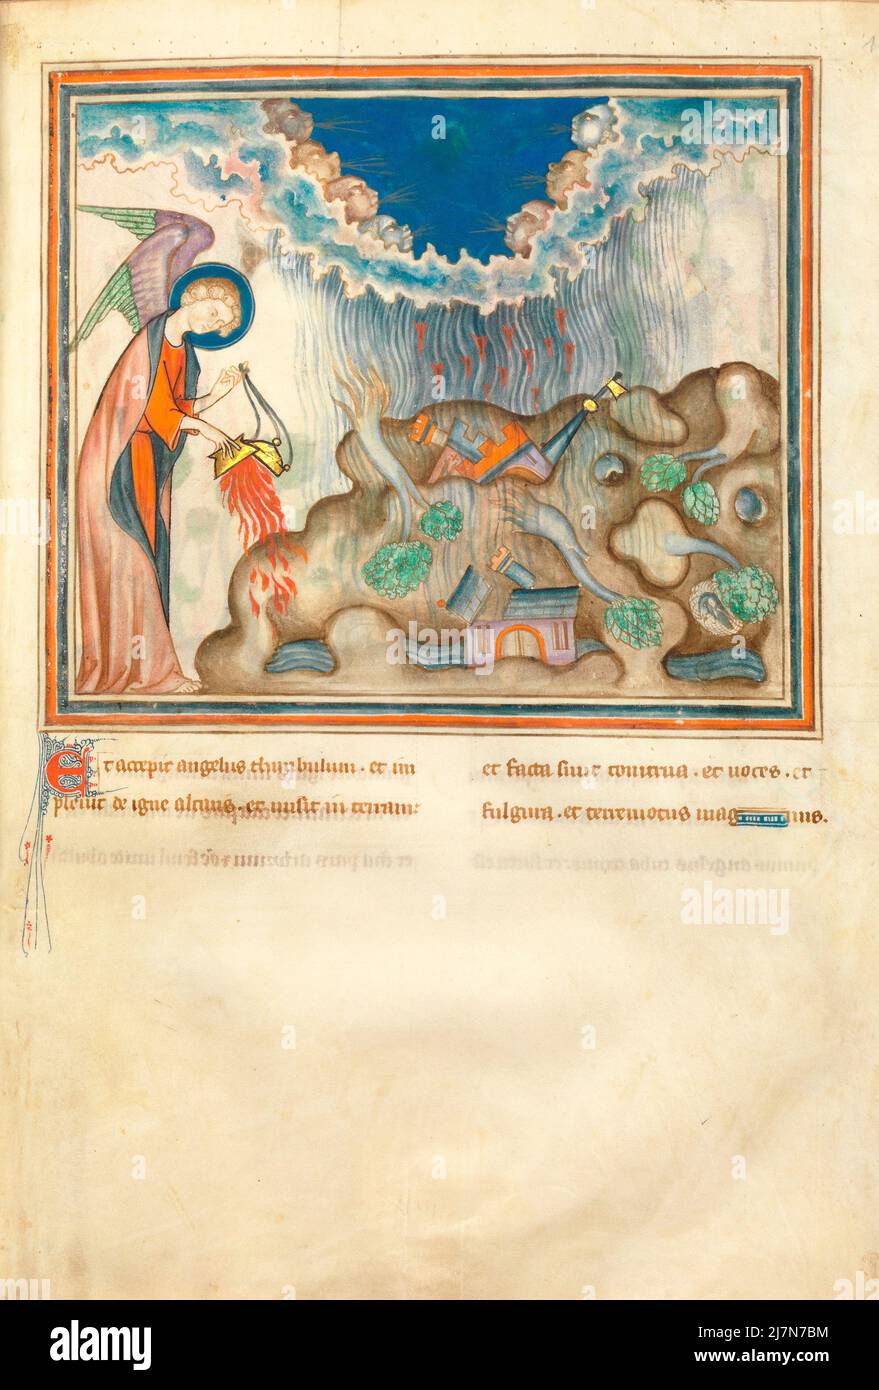 The Cloisters Apocalypse ca. 1330  - The Apocalypse, or Book of Revelation,  John the Evangelist , giovanni evangelista, during his exile on the Greek island of Patmos. In this Image -The Emptying of the Censer Stock Photo